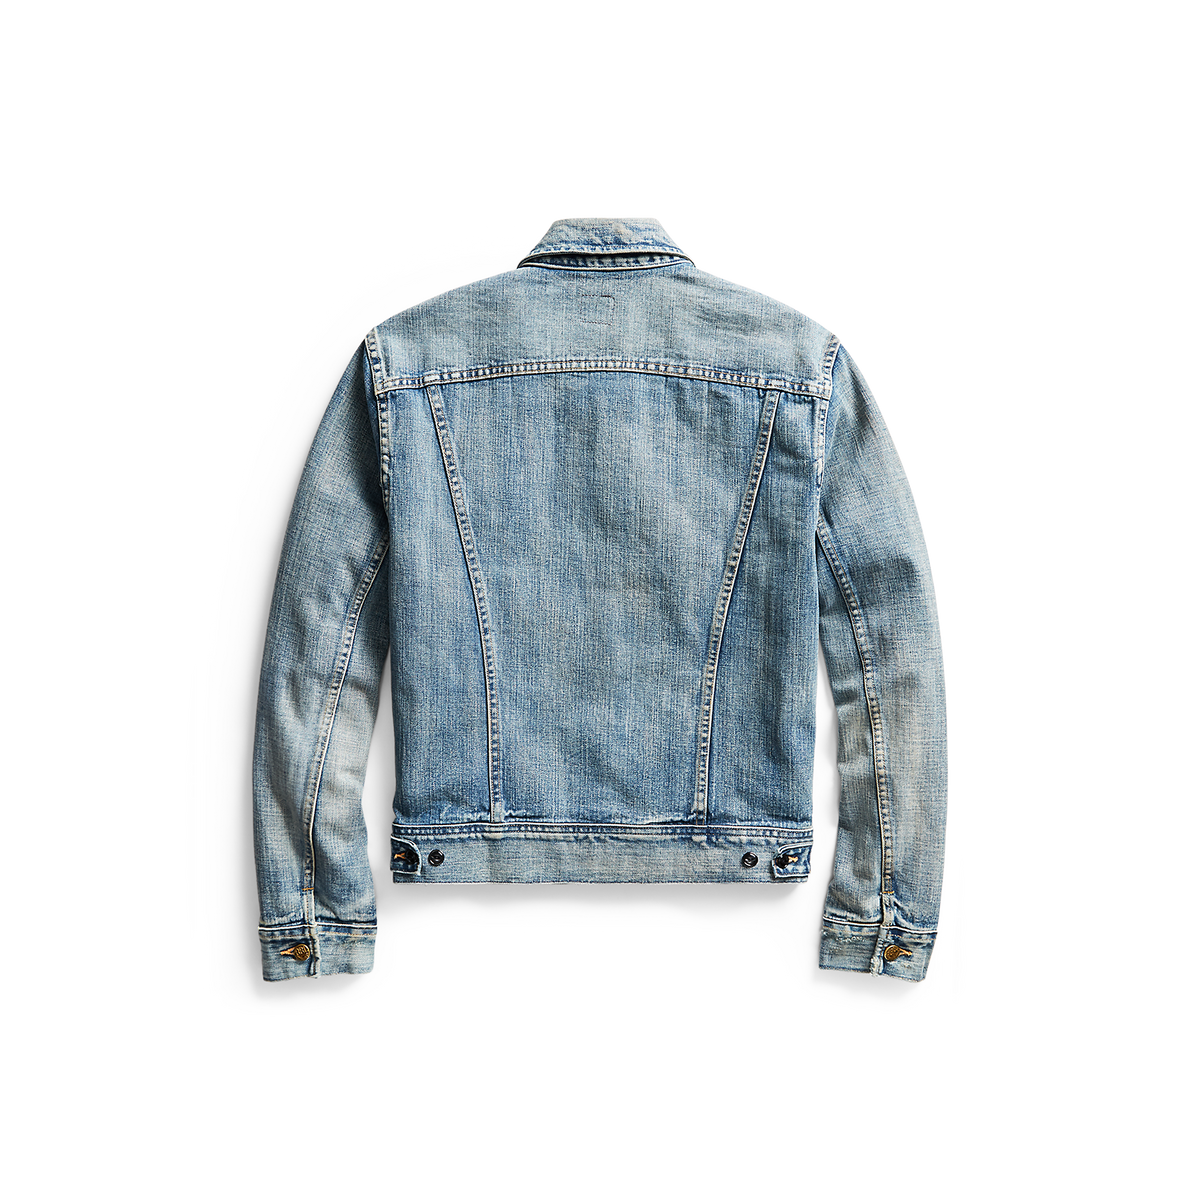 Coming soon - Limited edition denim jacquard jacket . #DoubleRL